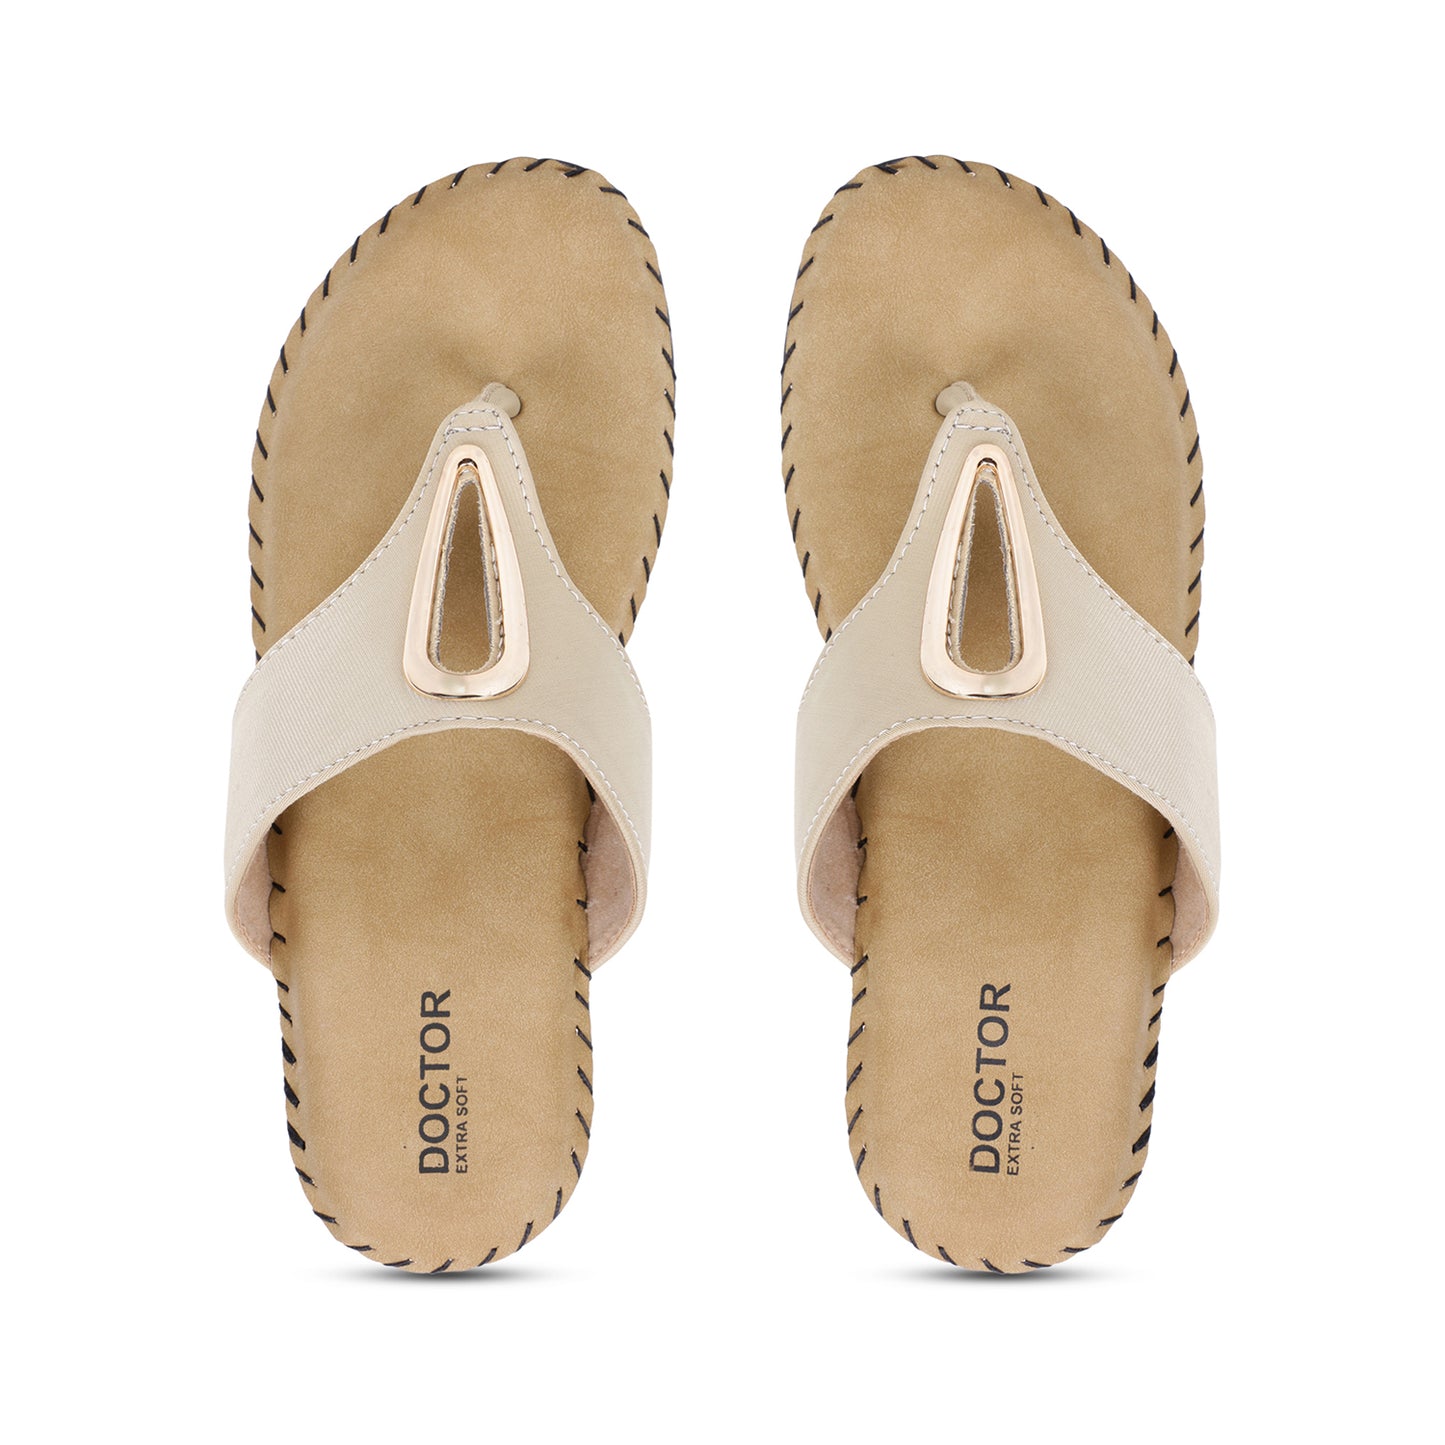 DOCTOR EXTRA SOFT ART-29 Women's Dr.Chappal For Ladies With Open Toe Style, Comfortable For Old Age & Foot Problems